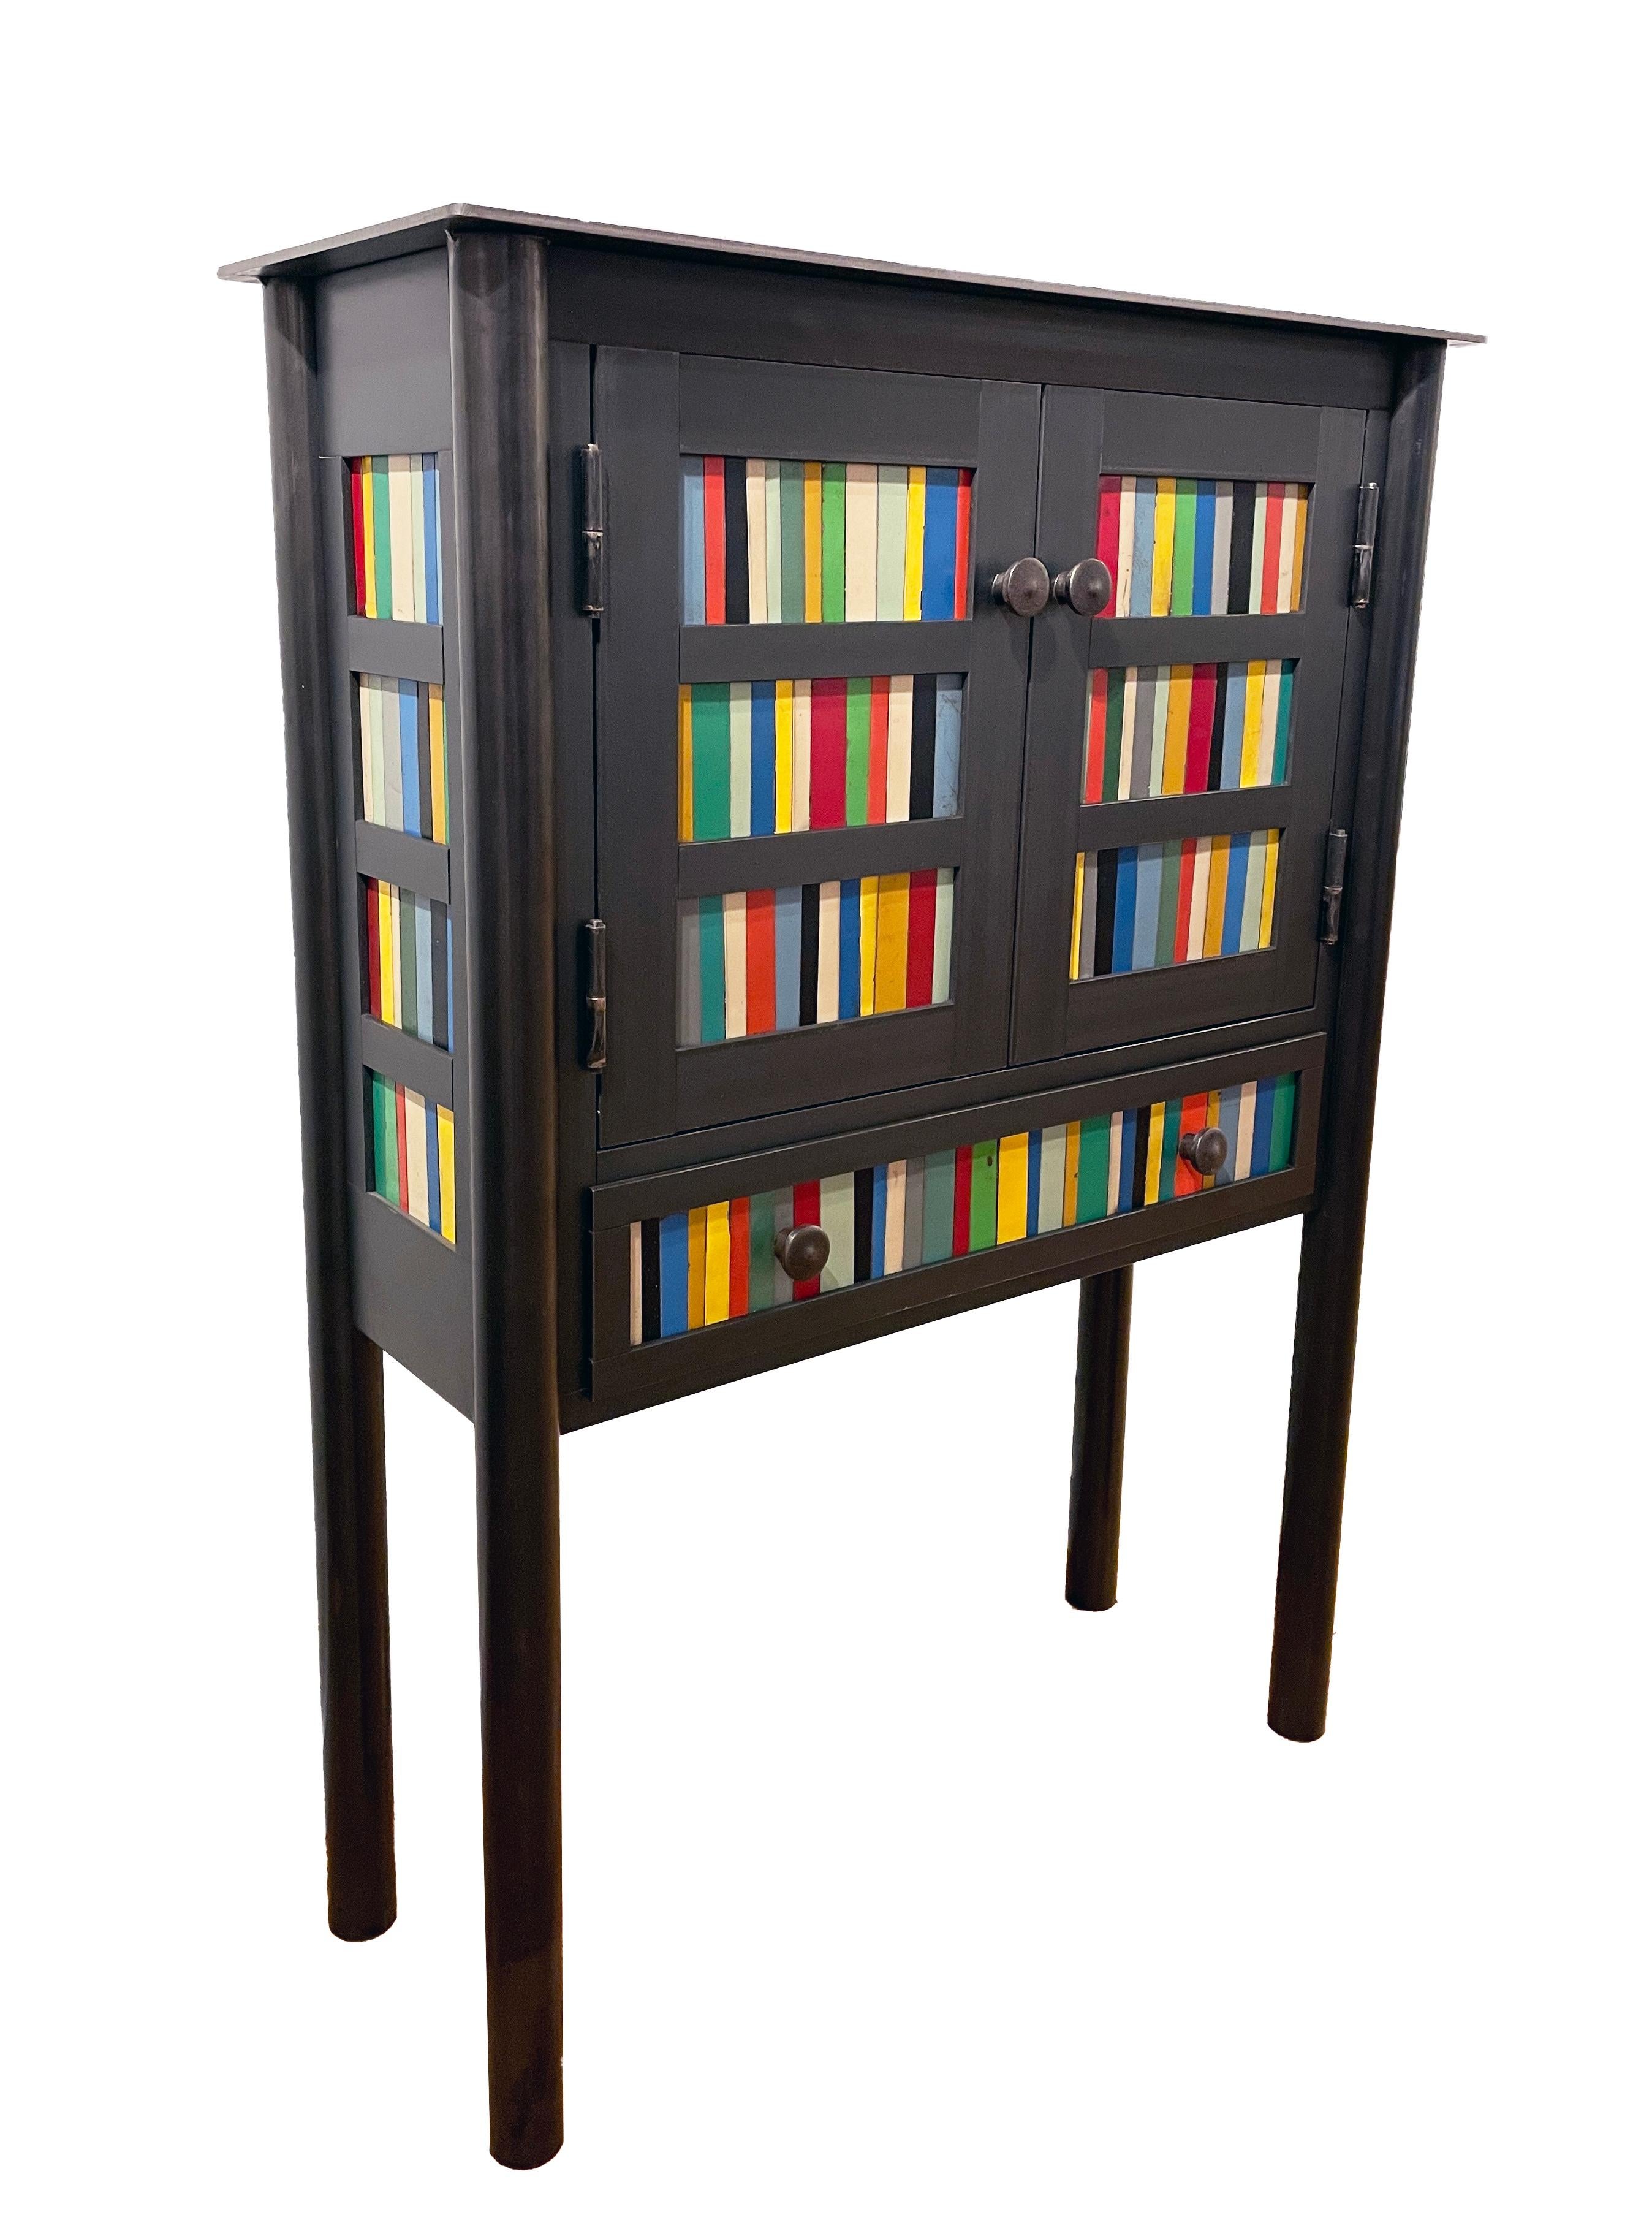 This modern cabinet is made from hot-rolled steel with the front and side panel designs based on the gees bend quilts. Each panel is unique with the use of painted steel strips that are salvaged. Its brightly colored pieces enhance the Industrial